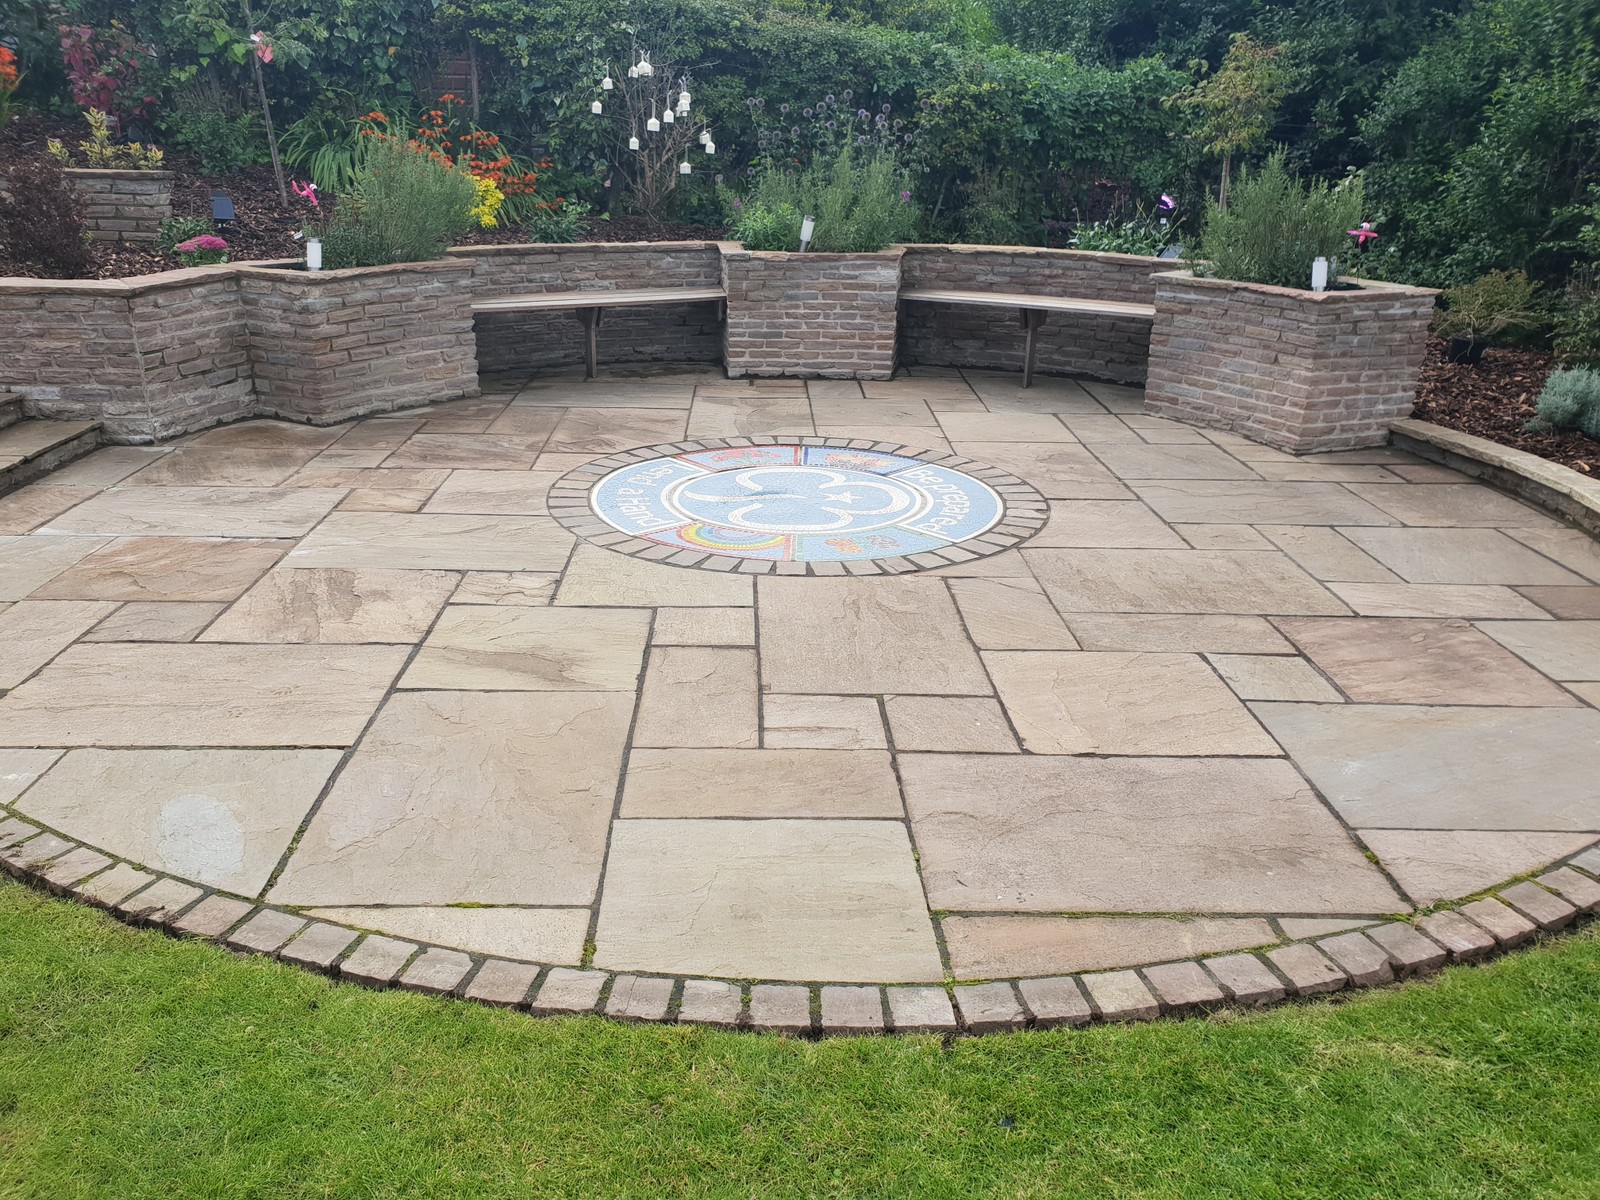 Sandstone patio with inset mosaic